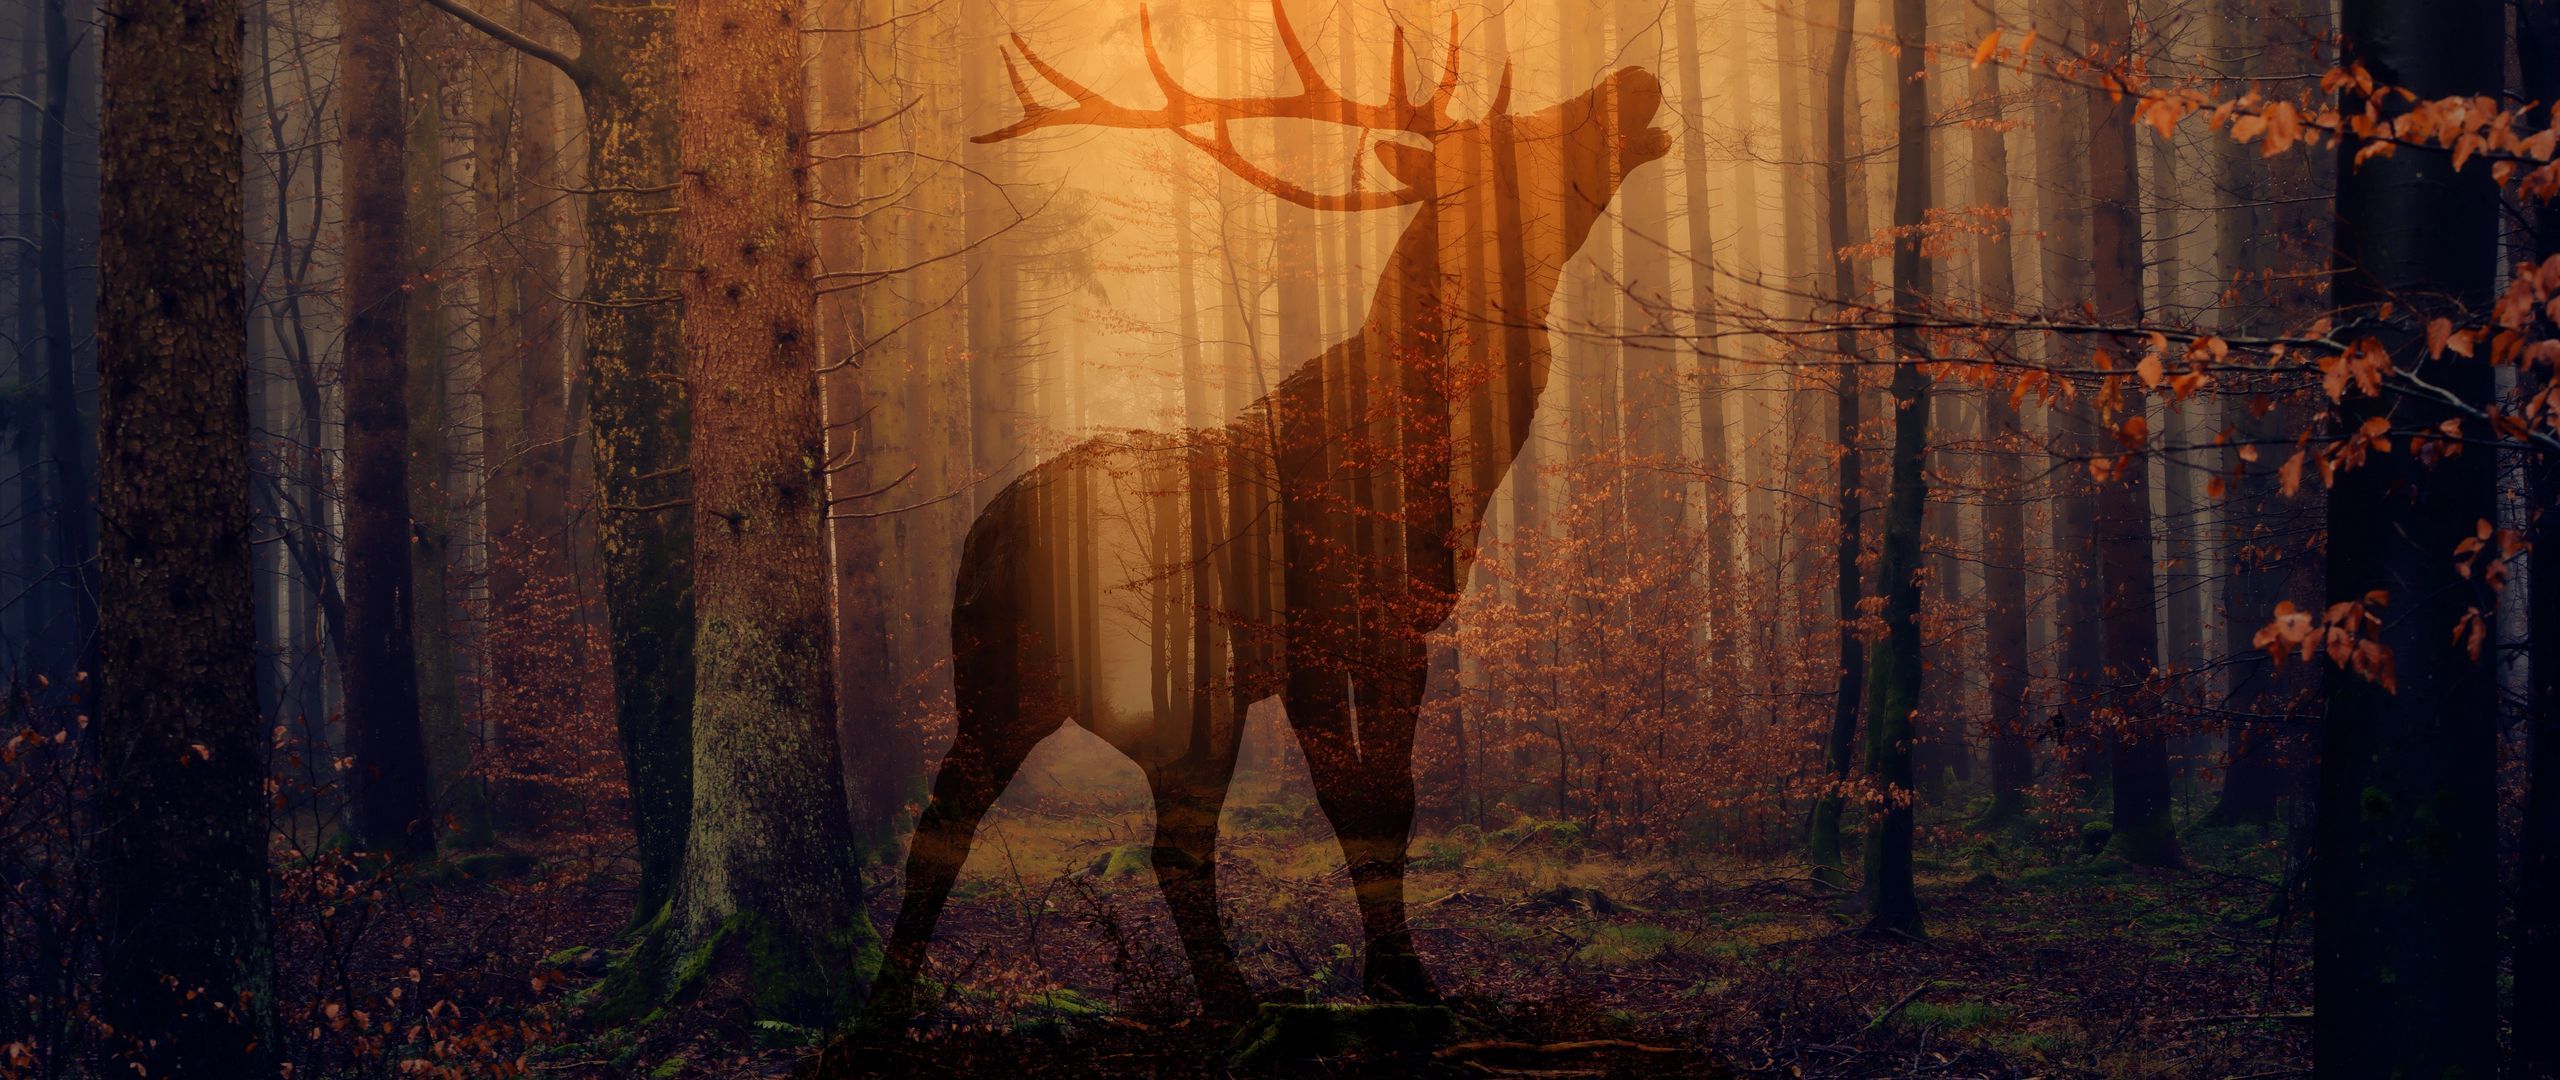 Download wallpaper 2560x1080 deer, forest, fog, silhouette, autumn dual wide 1080p HD background